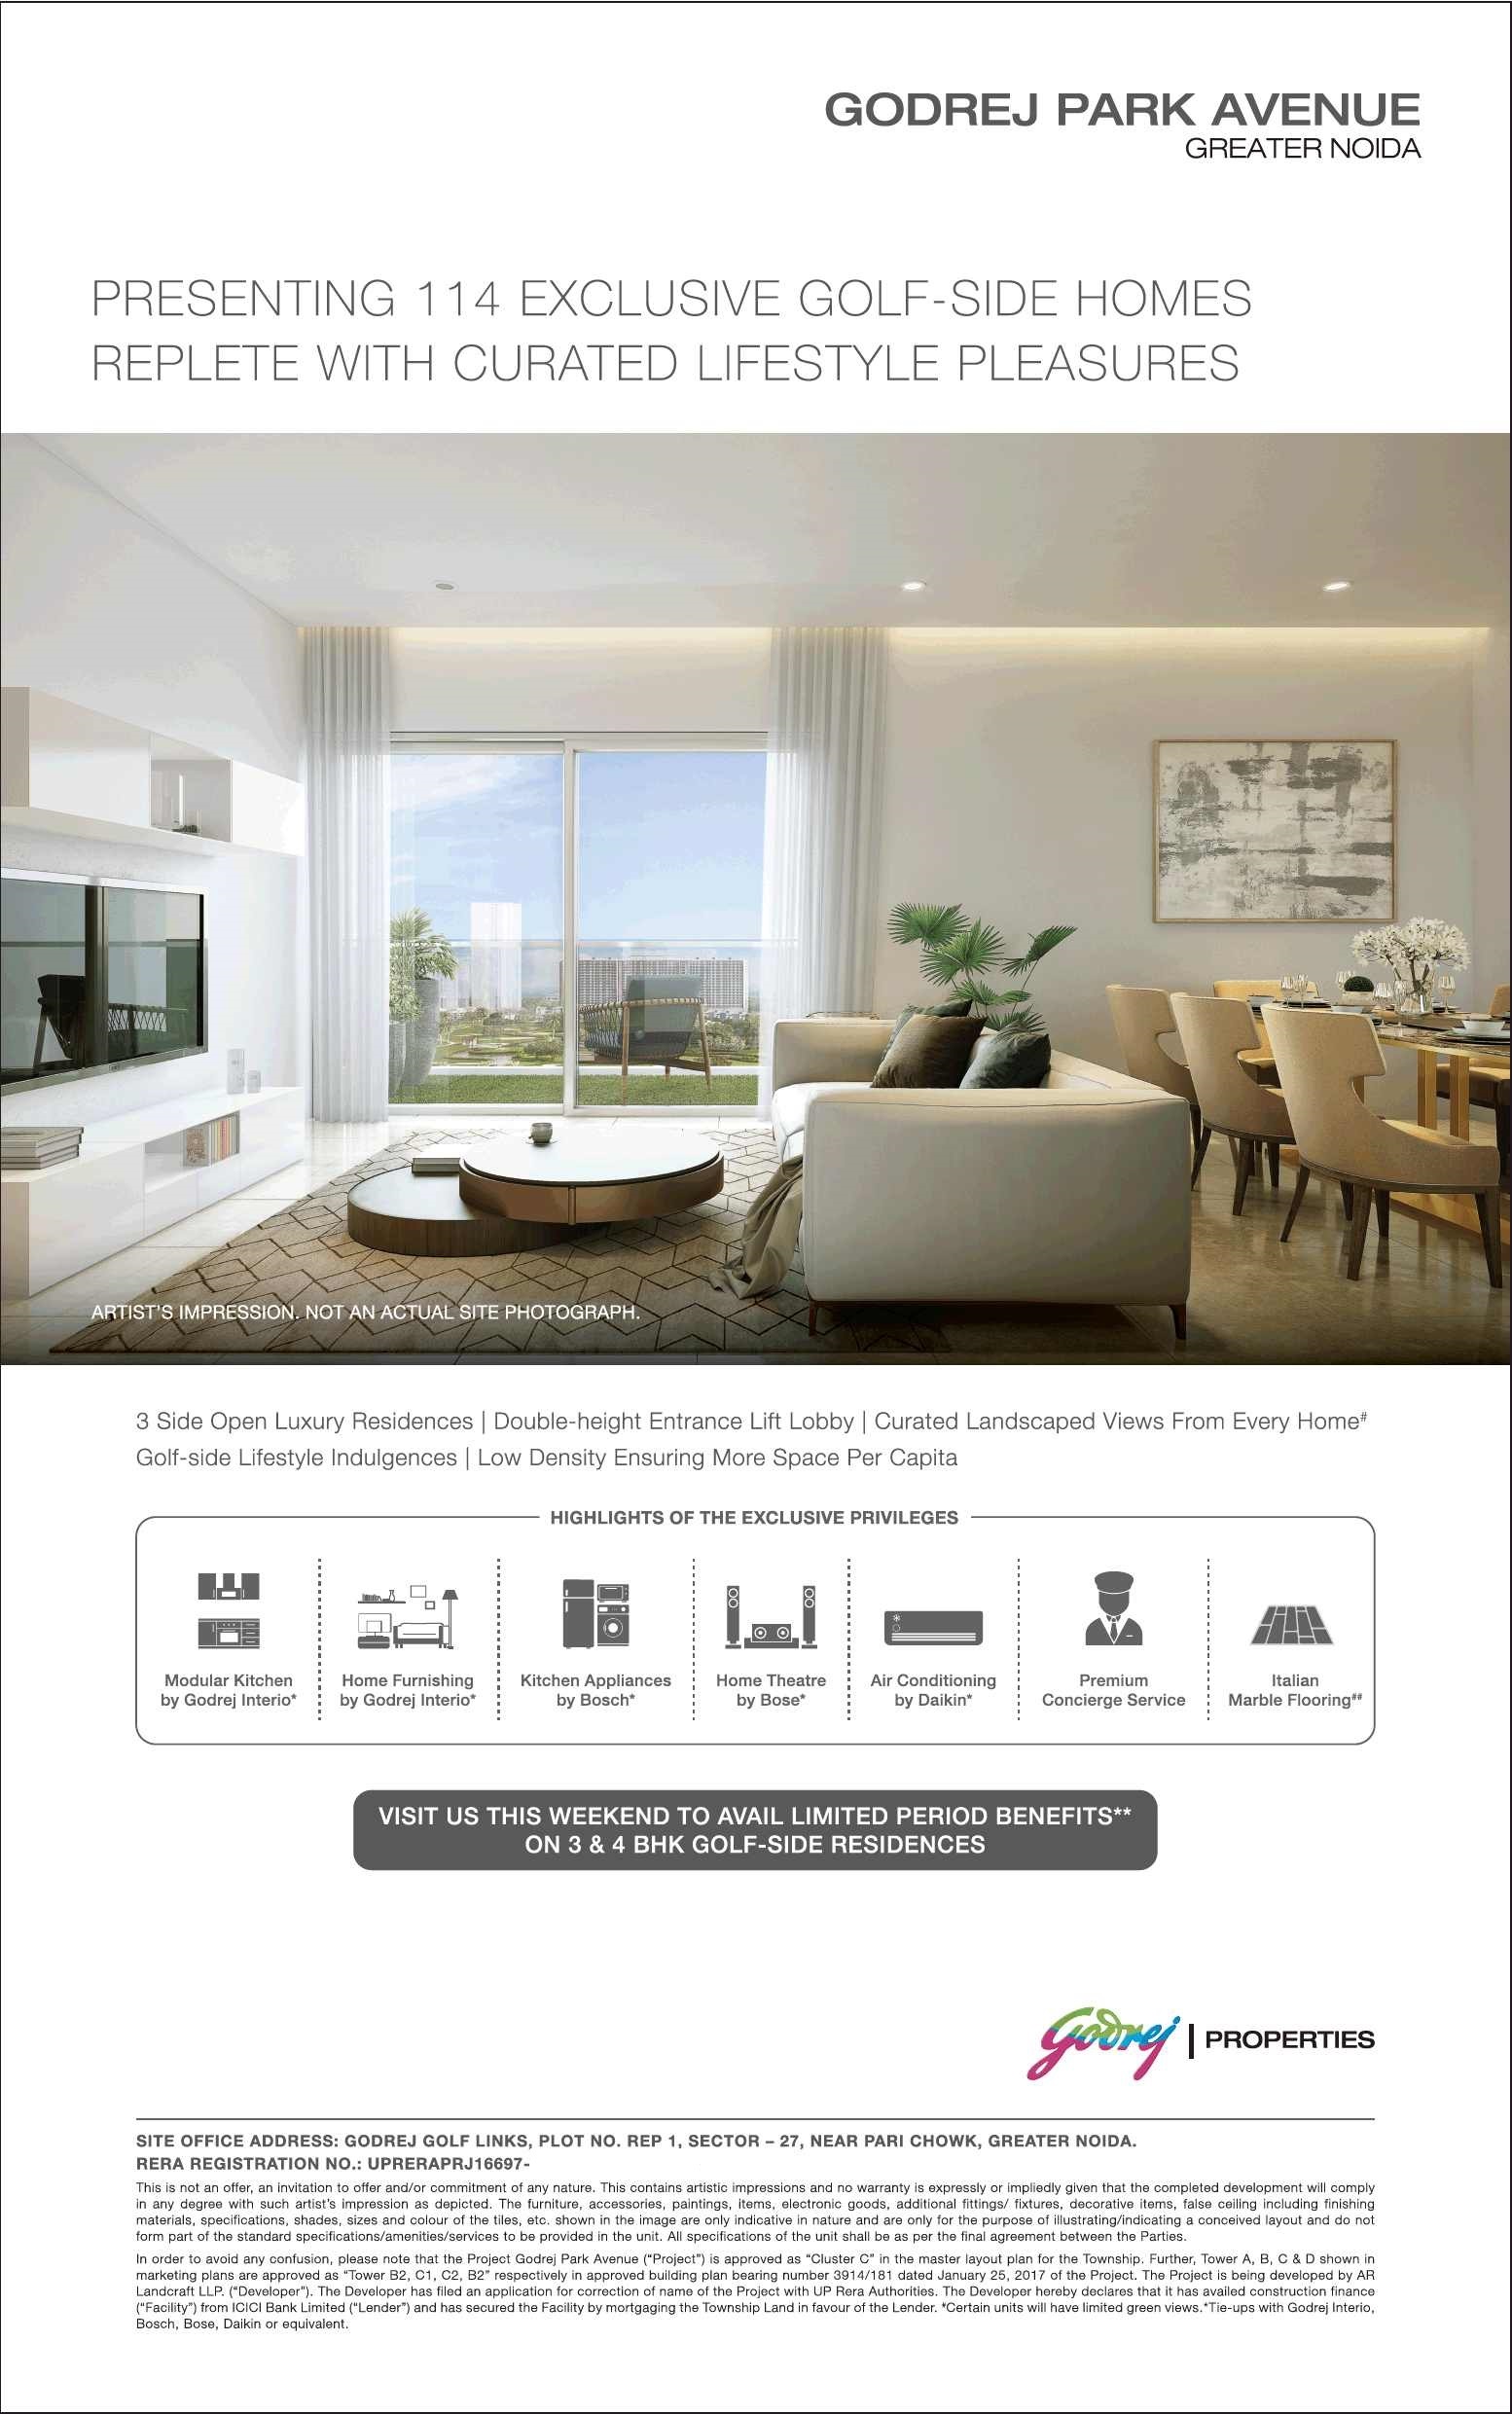 Avail 3 side open luxury residencies at Godrej Park Avenue in Greater Noida